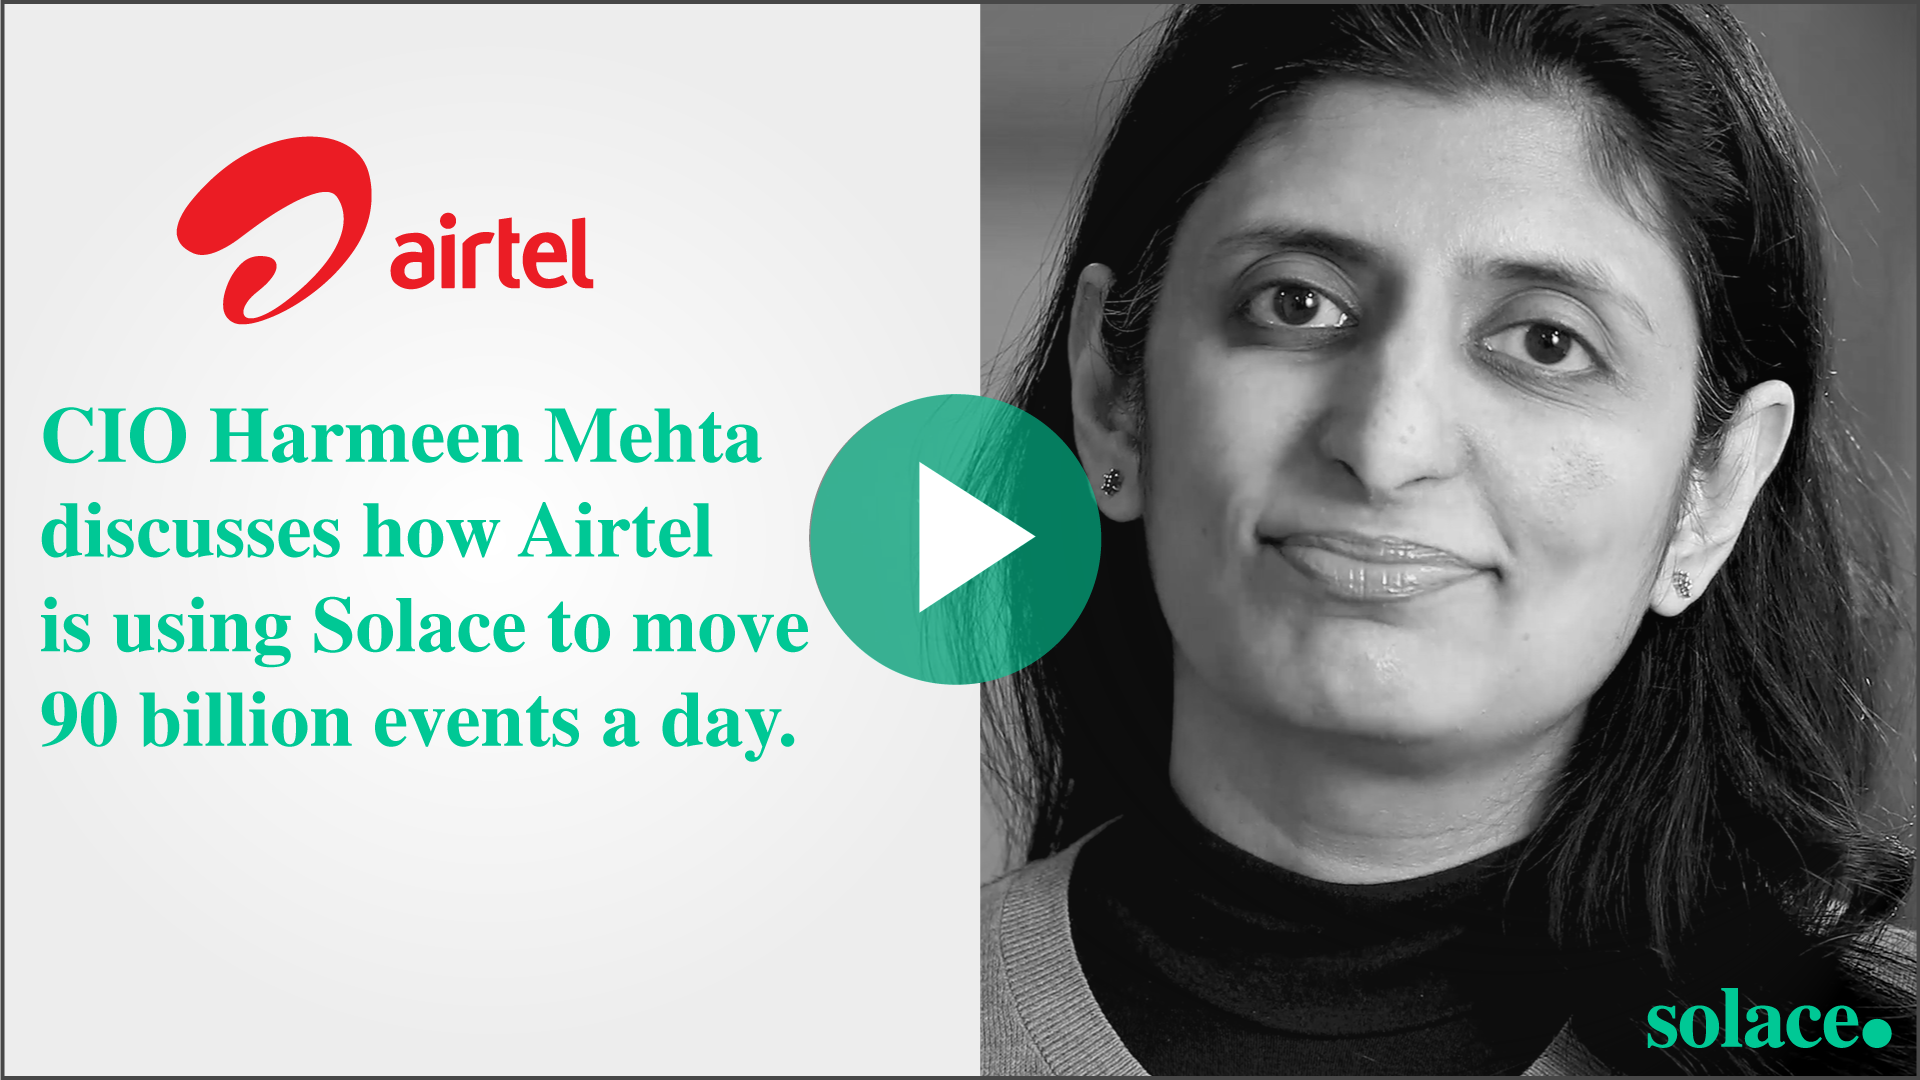 Airtel has defined Solace as their enterprise-wide messaging technology